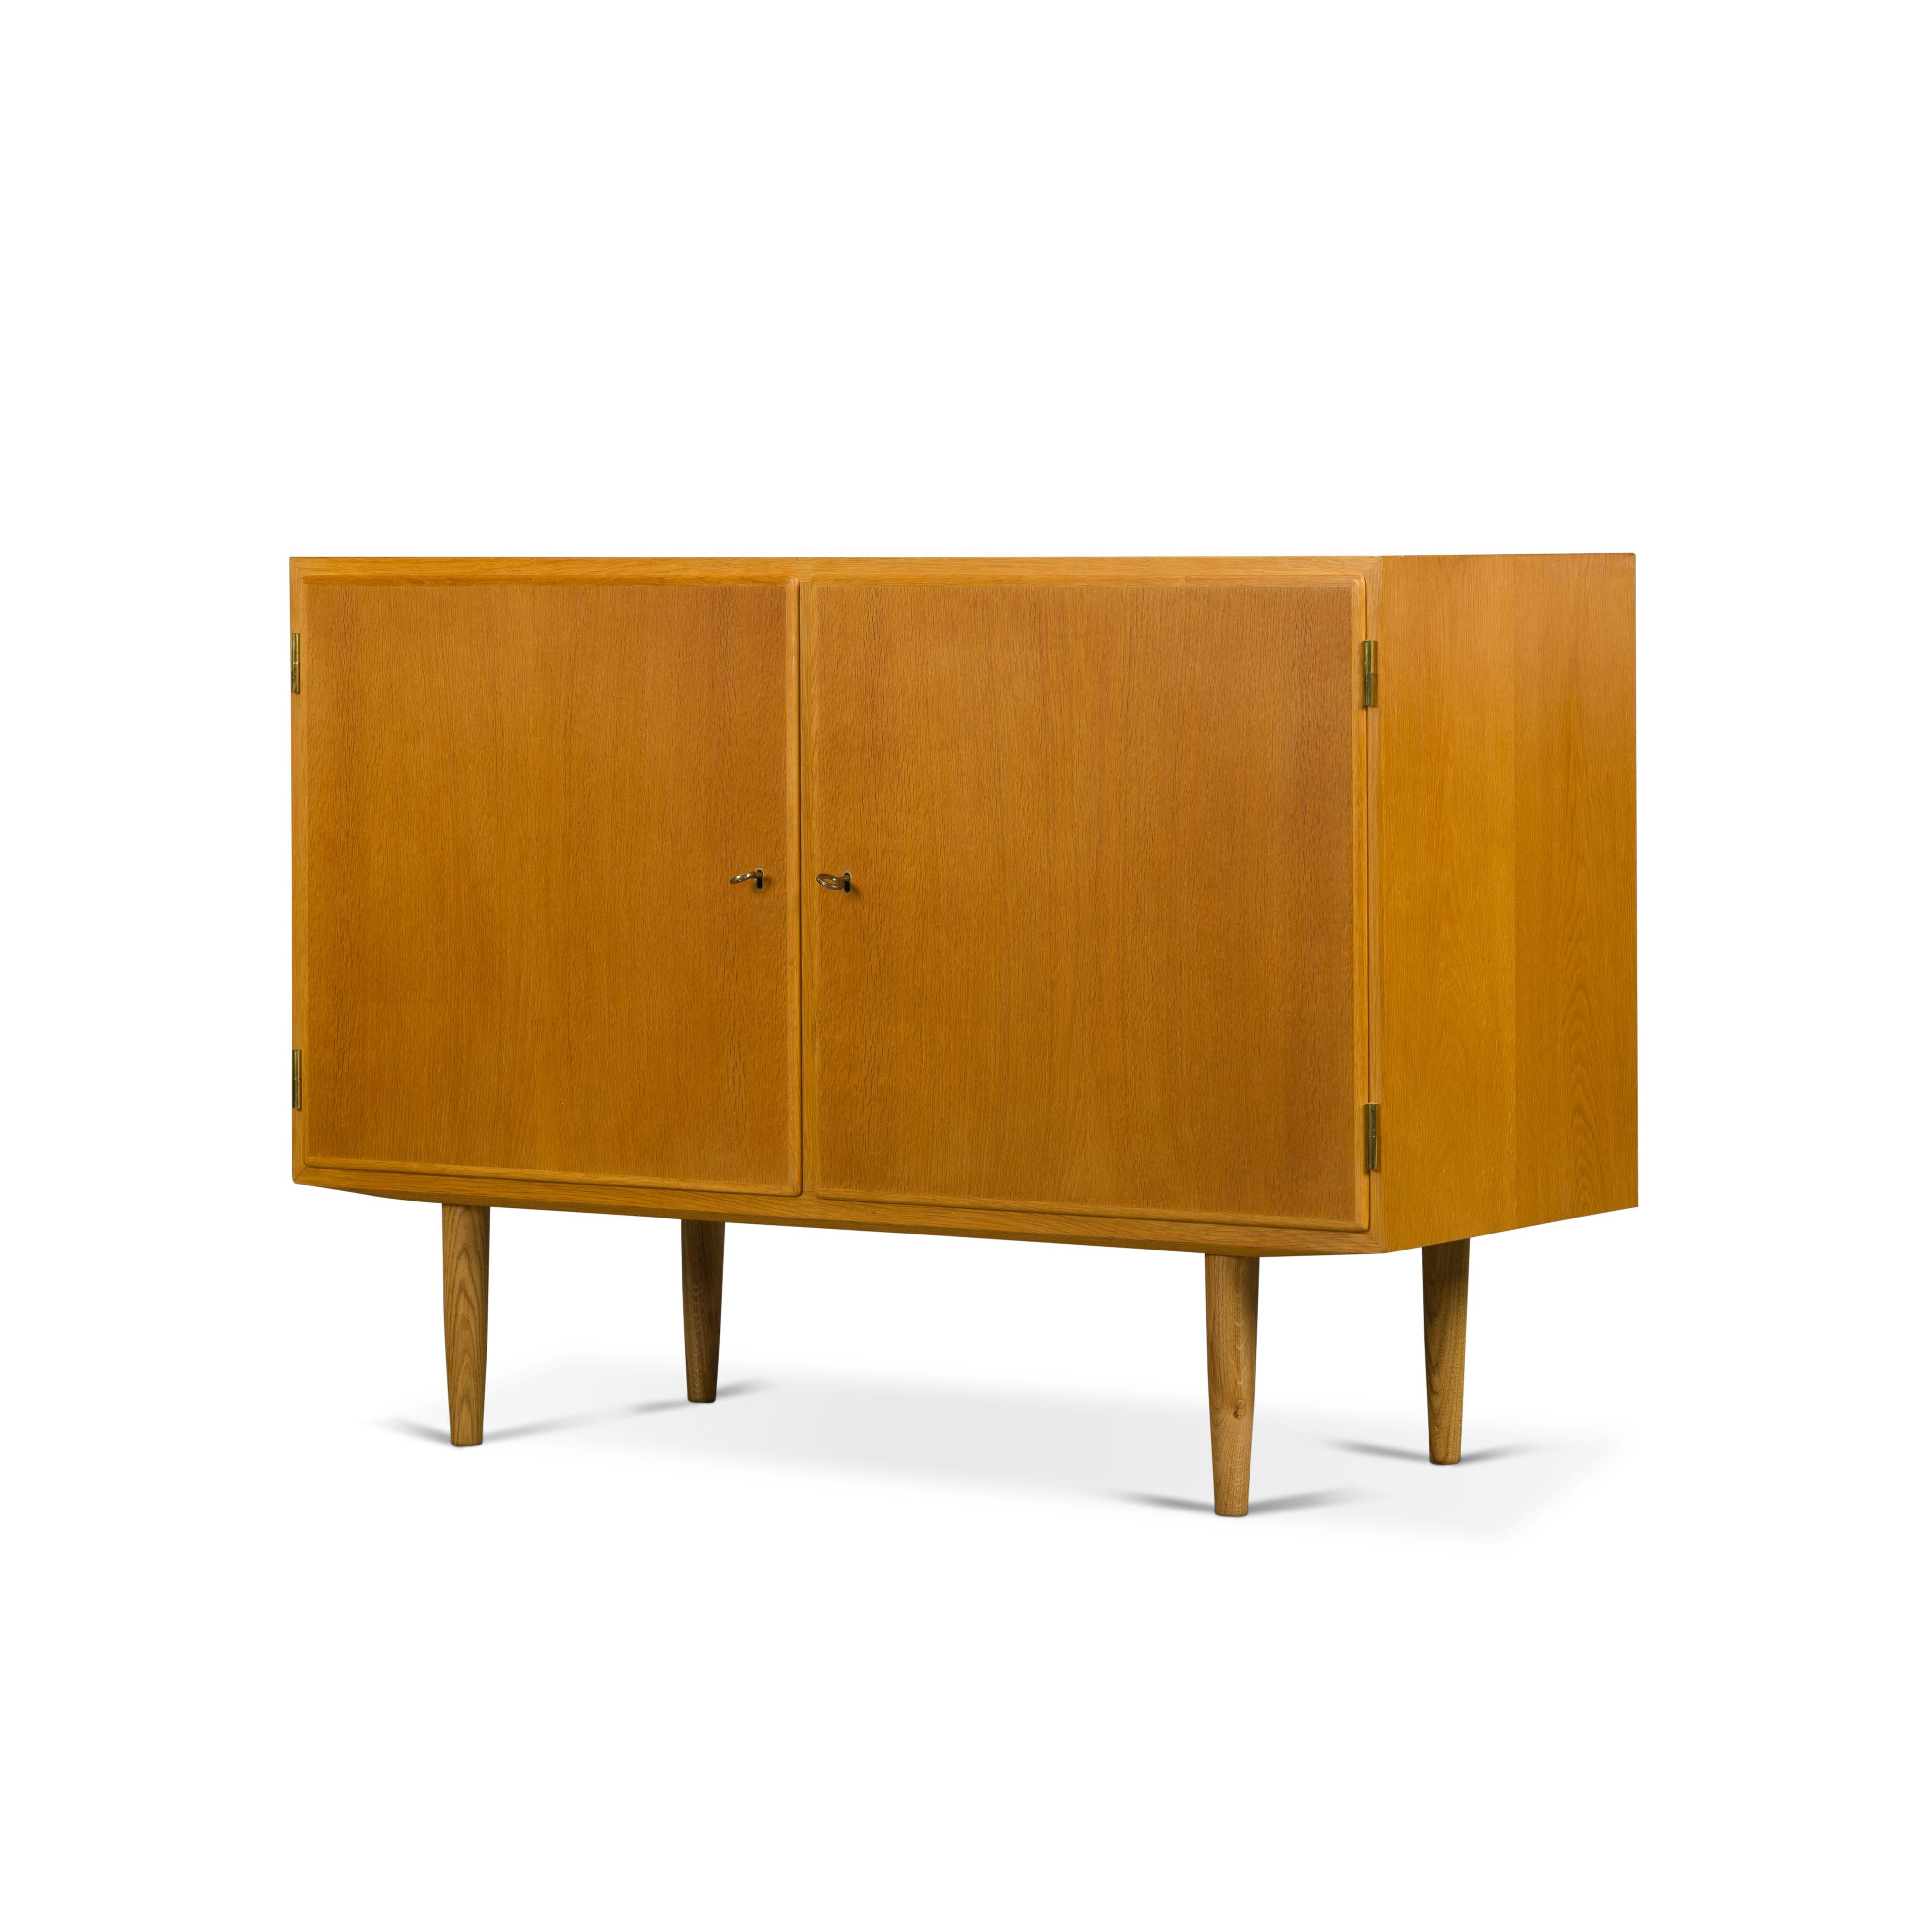 Designed by Carlo Jensen and made by Hundevad & Co. This side board is truly beautiful. Finished in an oak veneer this cabinet comes with great construction finesse and quality. There are three height adjustable drawers in beech and ash that allow